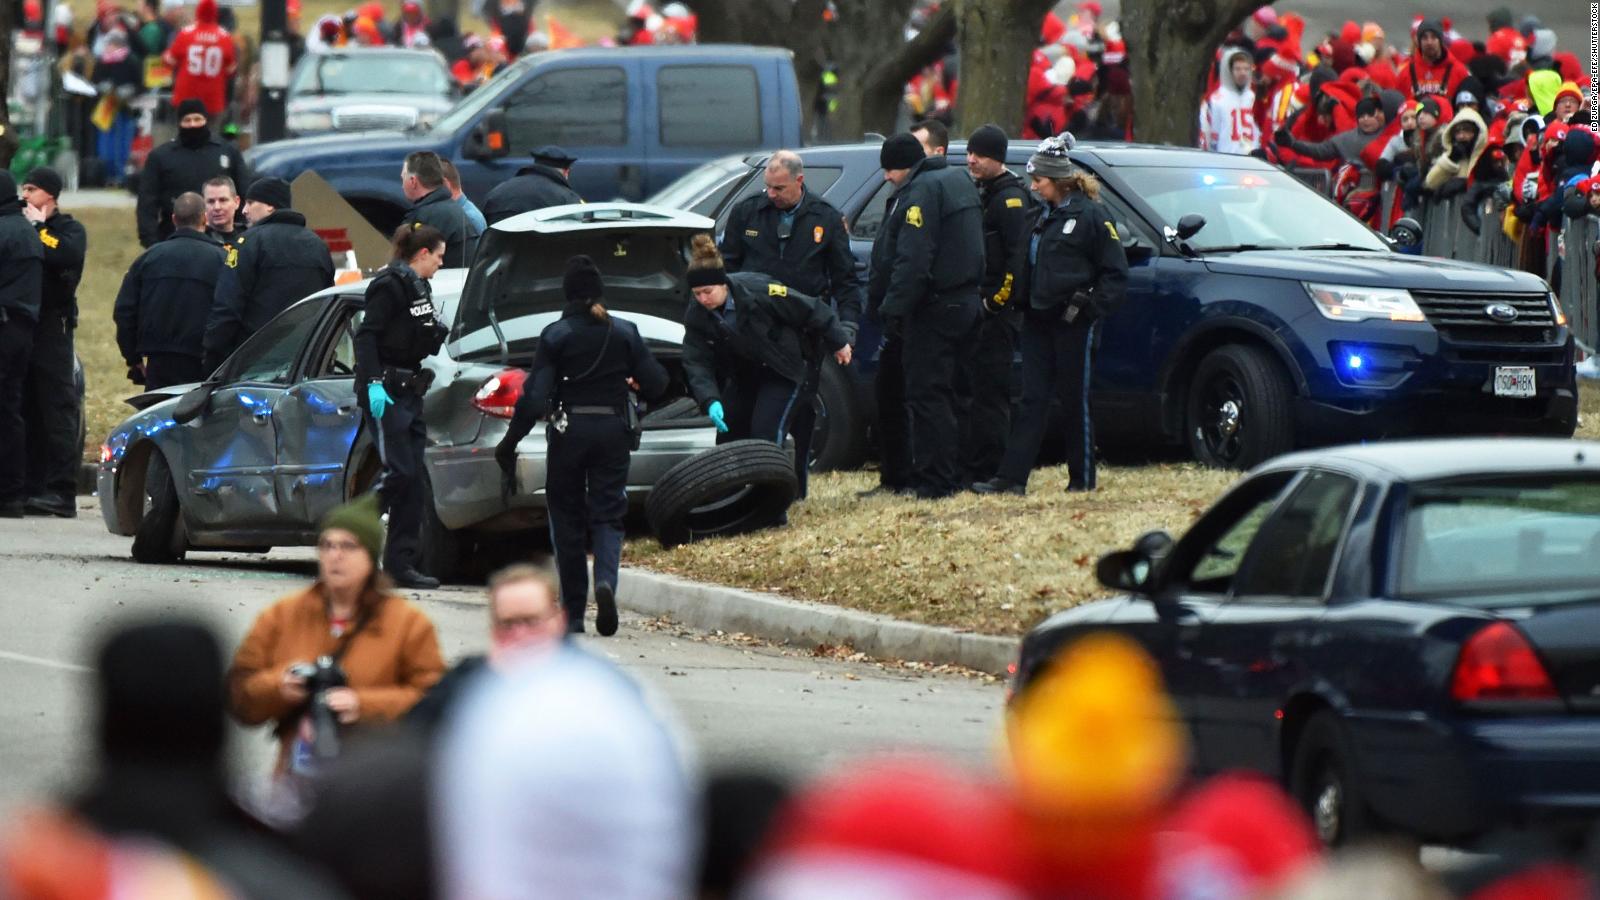 A Chase Along The Kansas City Chiefs Parade Route Ends With Suspects In Custody Cnn